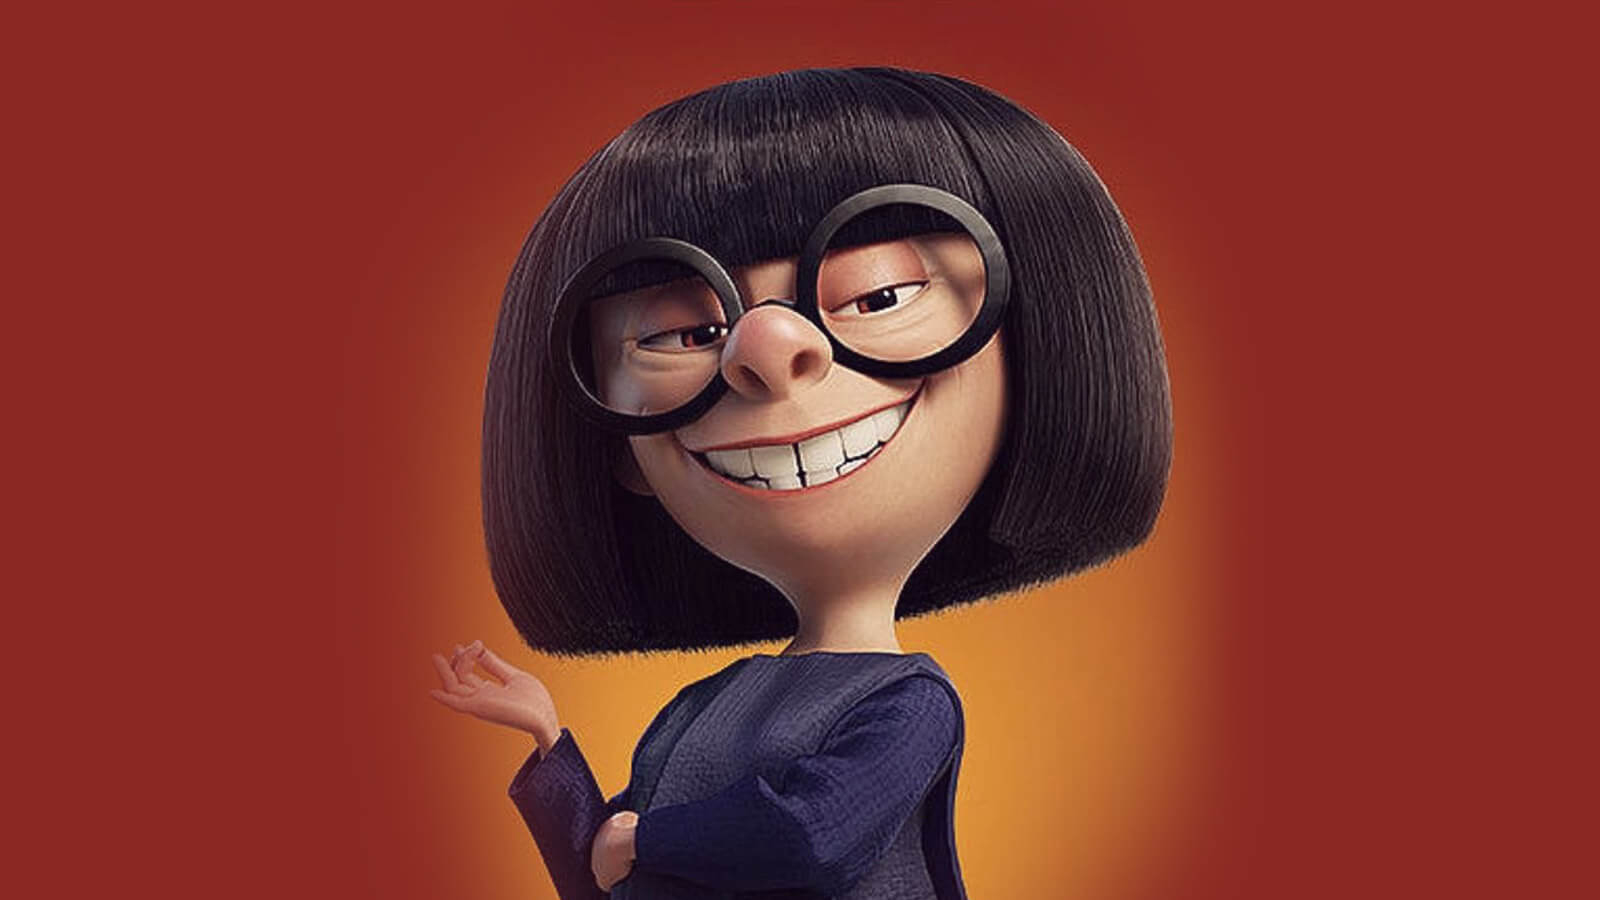 Edna from “The Incredibles”